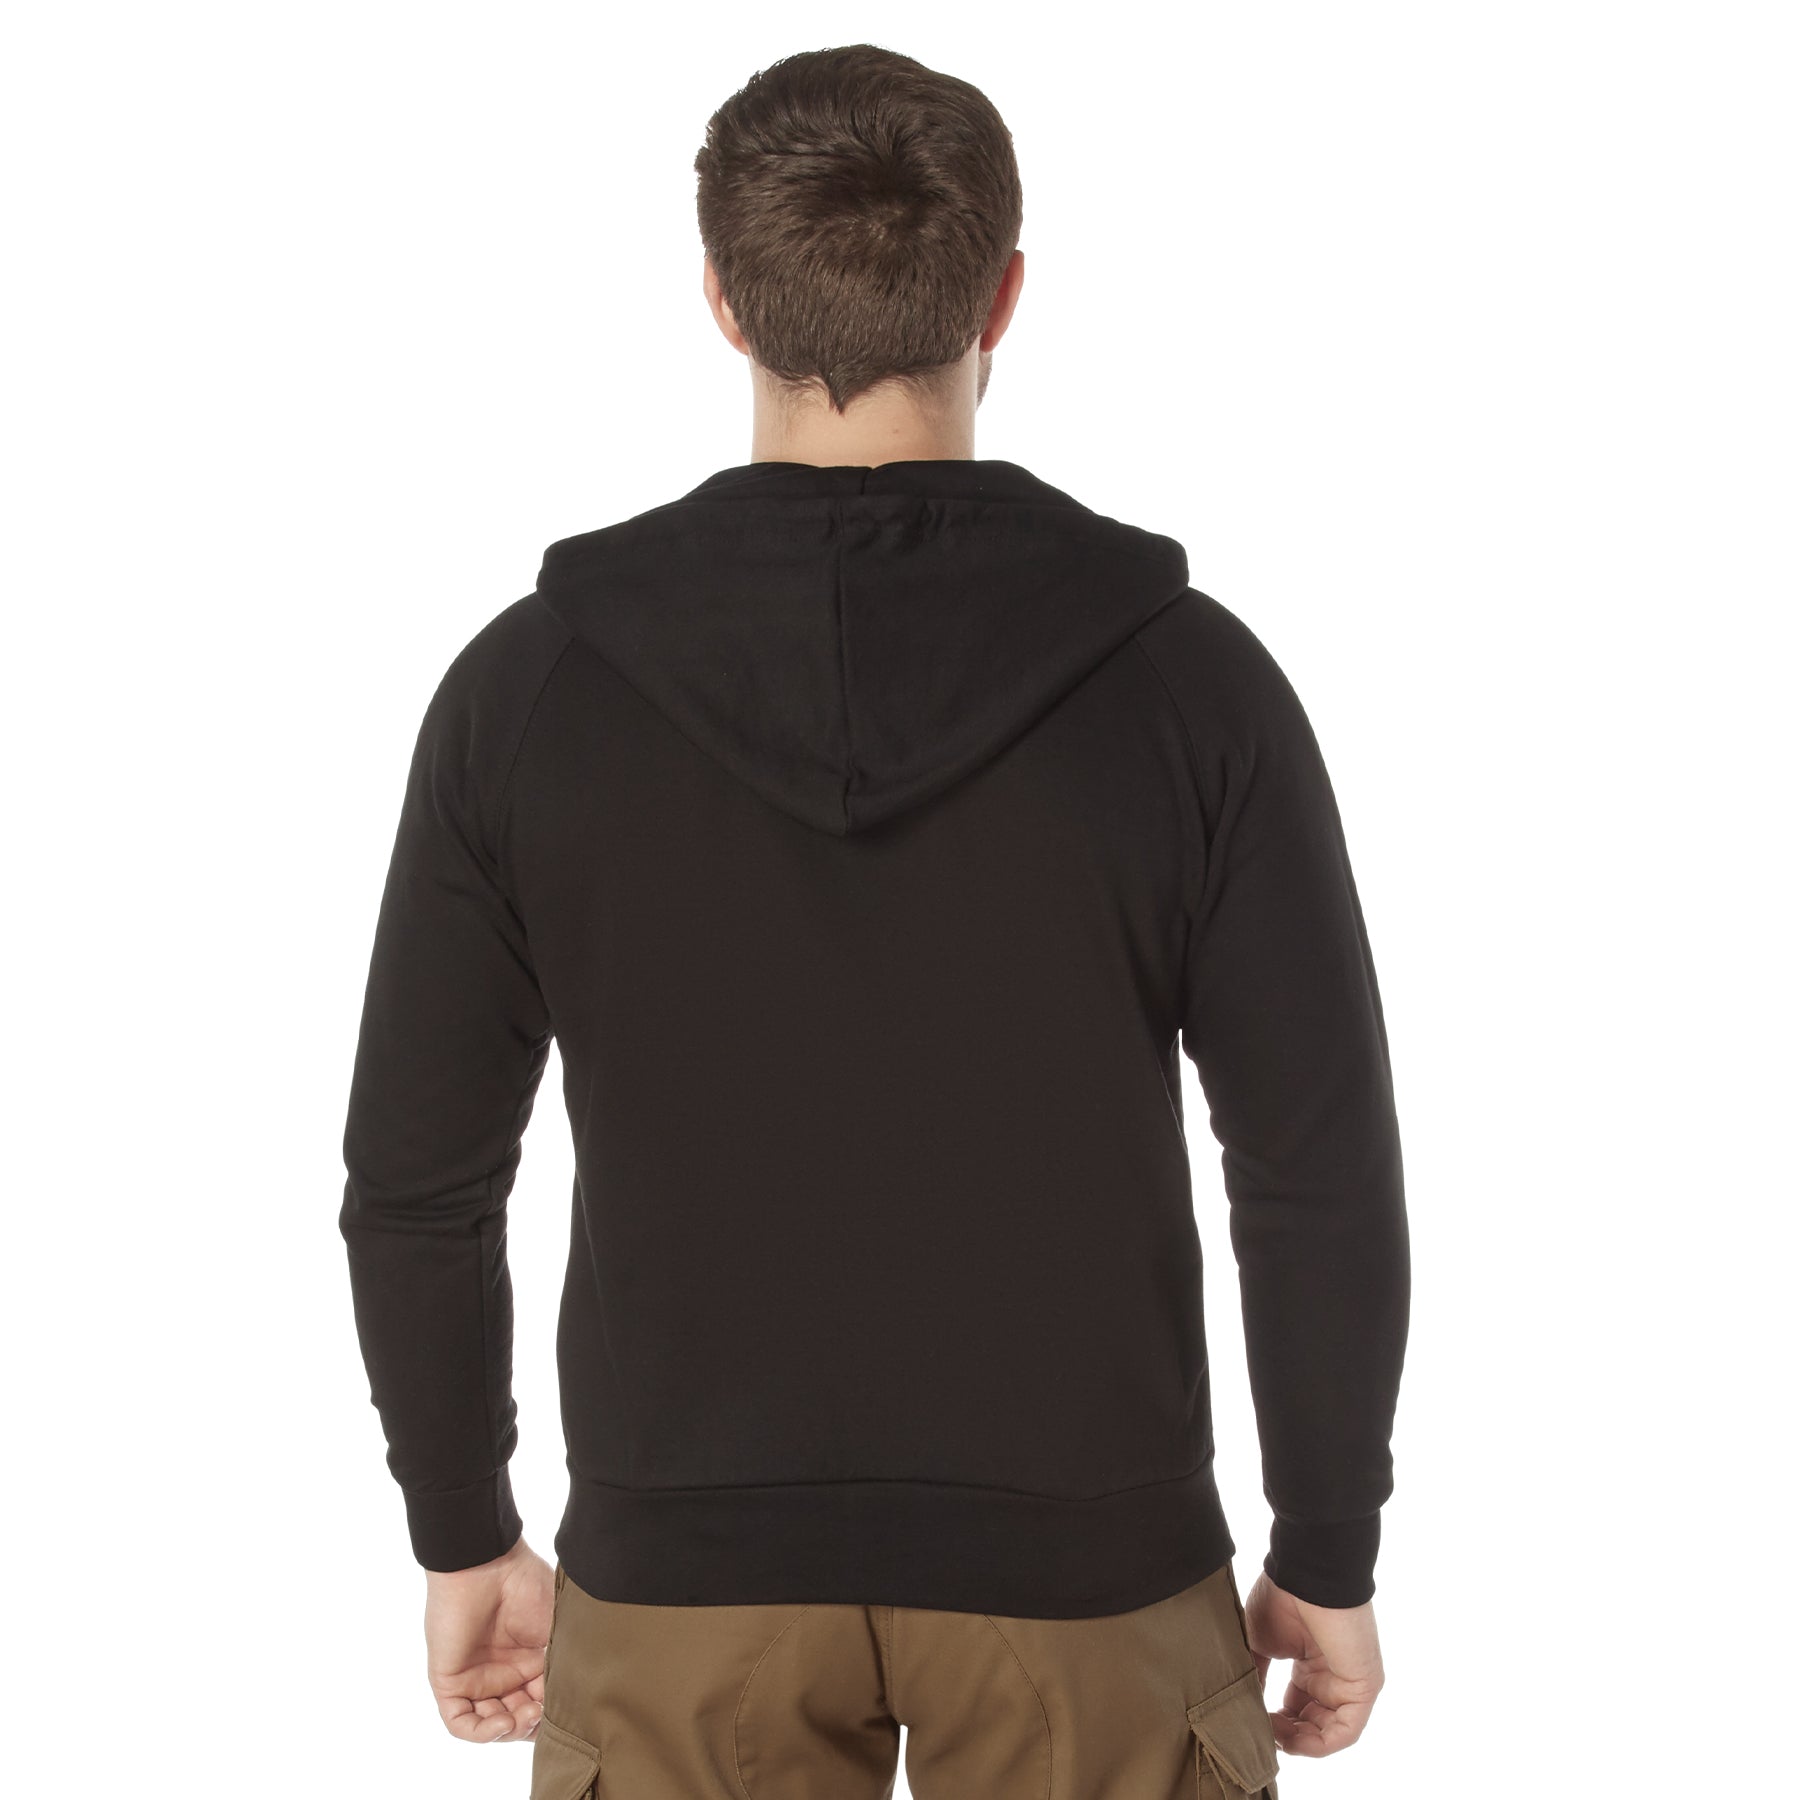 Poly/Cotton Thermal-Lined Zipper Hooded Sweatshirts